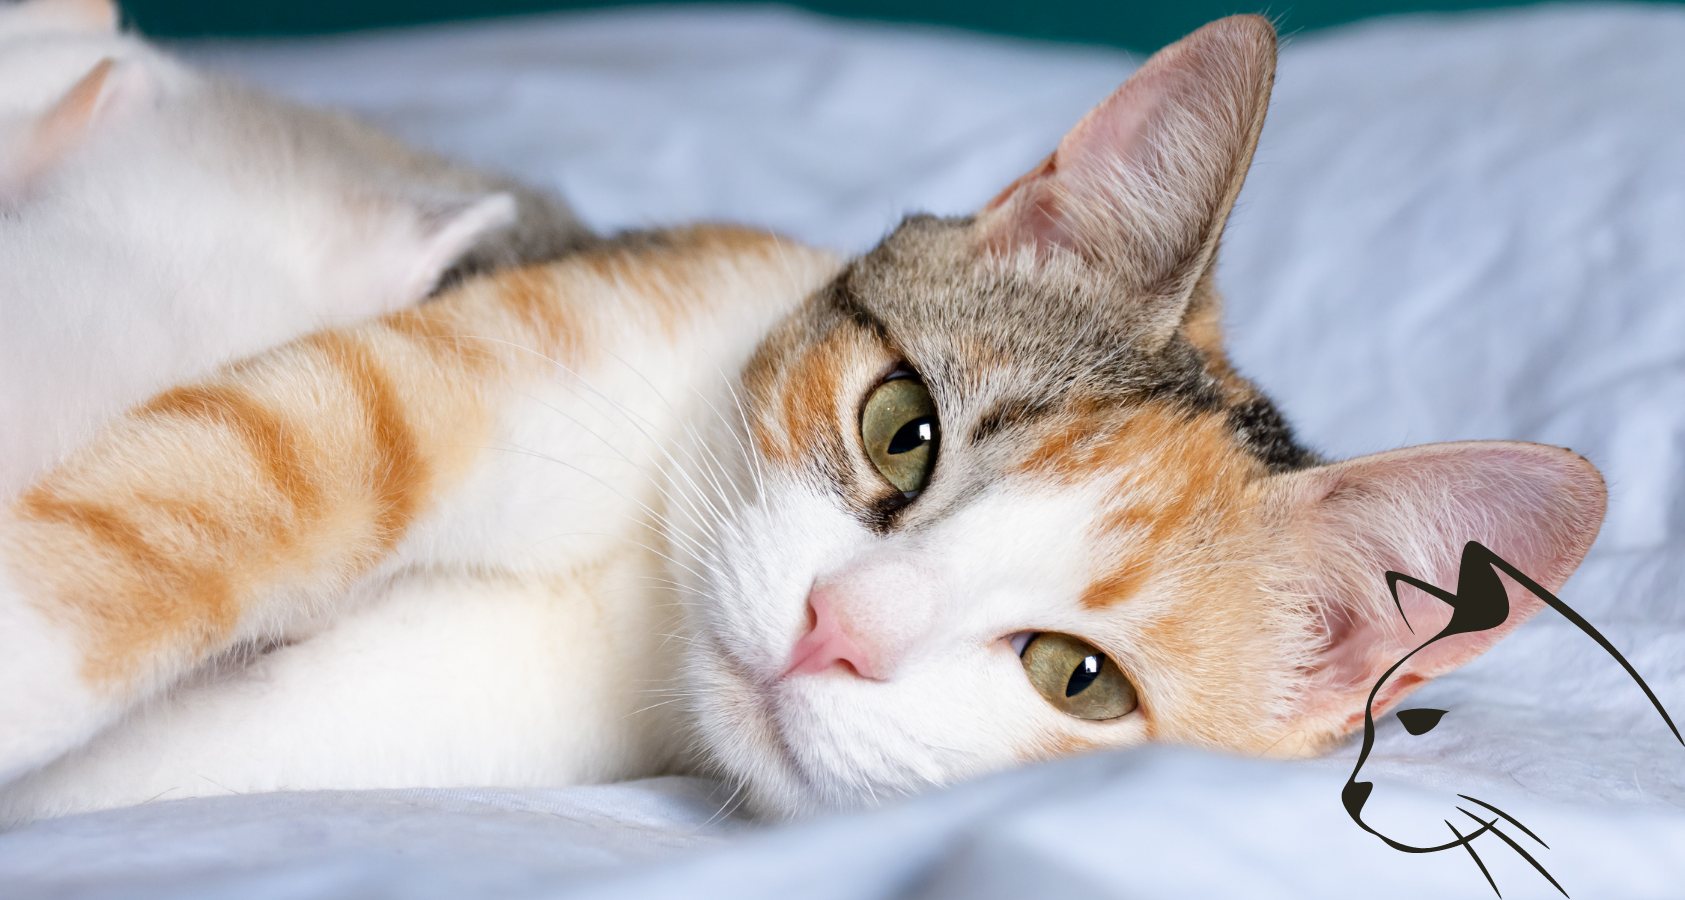 4 Ways to Tell If Your Cat Still Has Kittens Inside